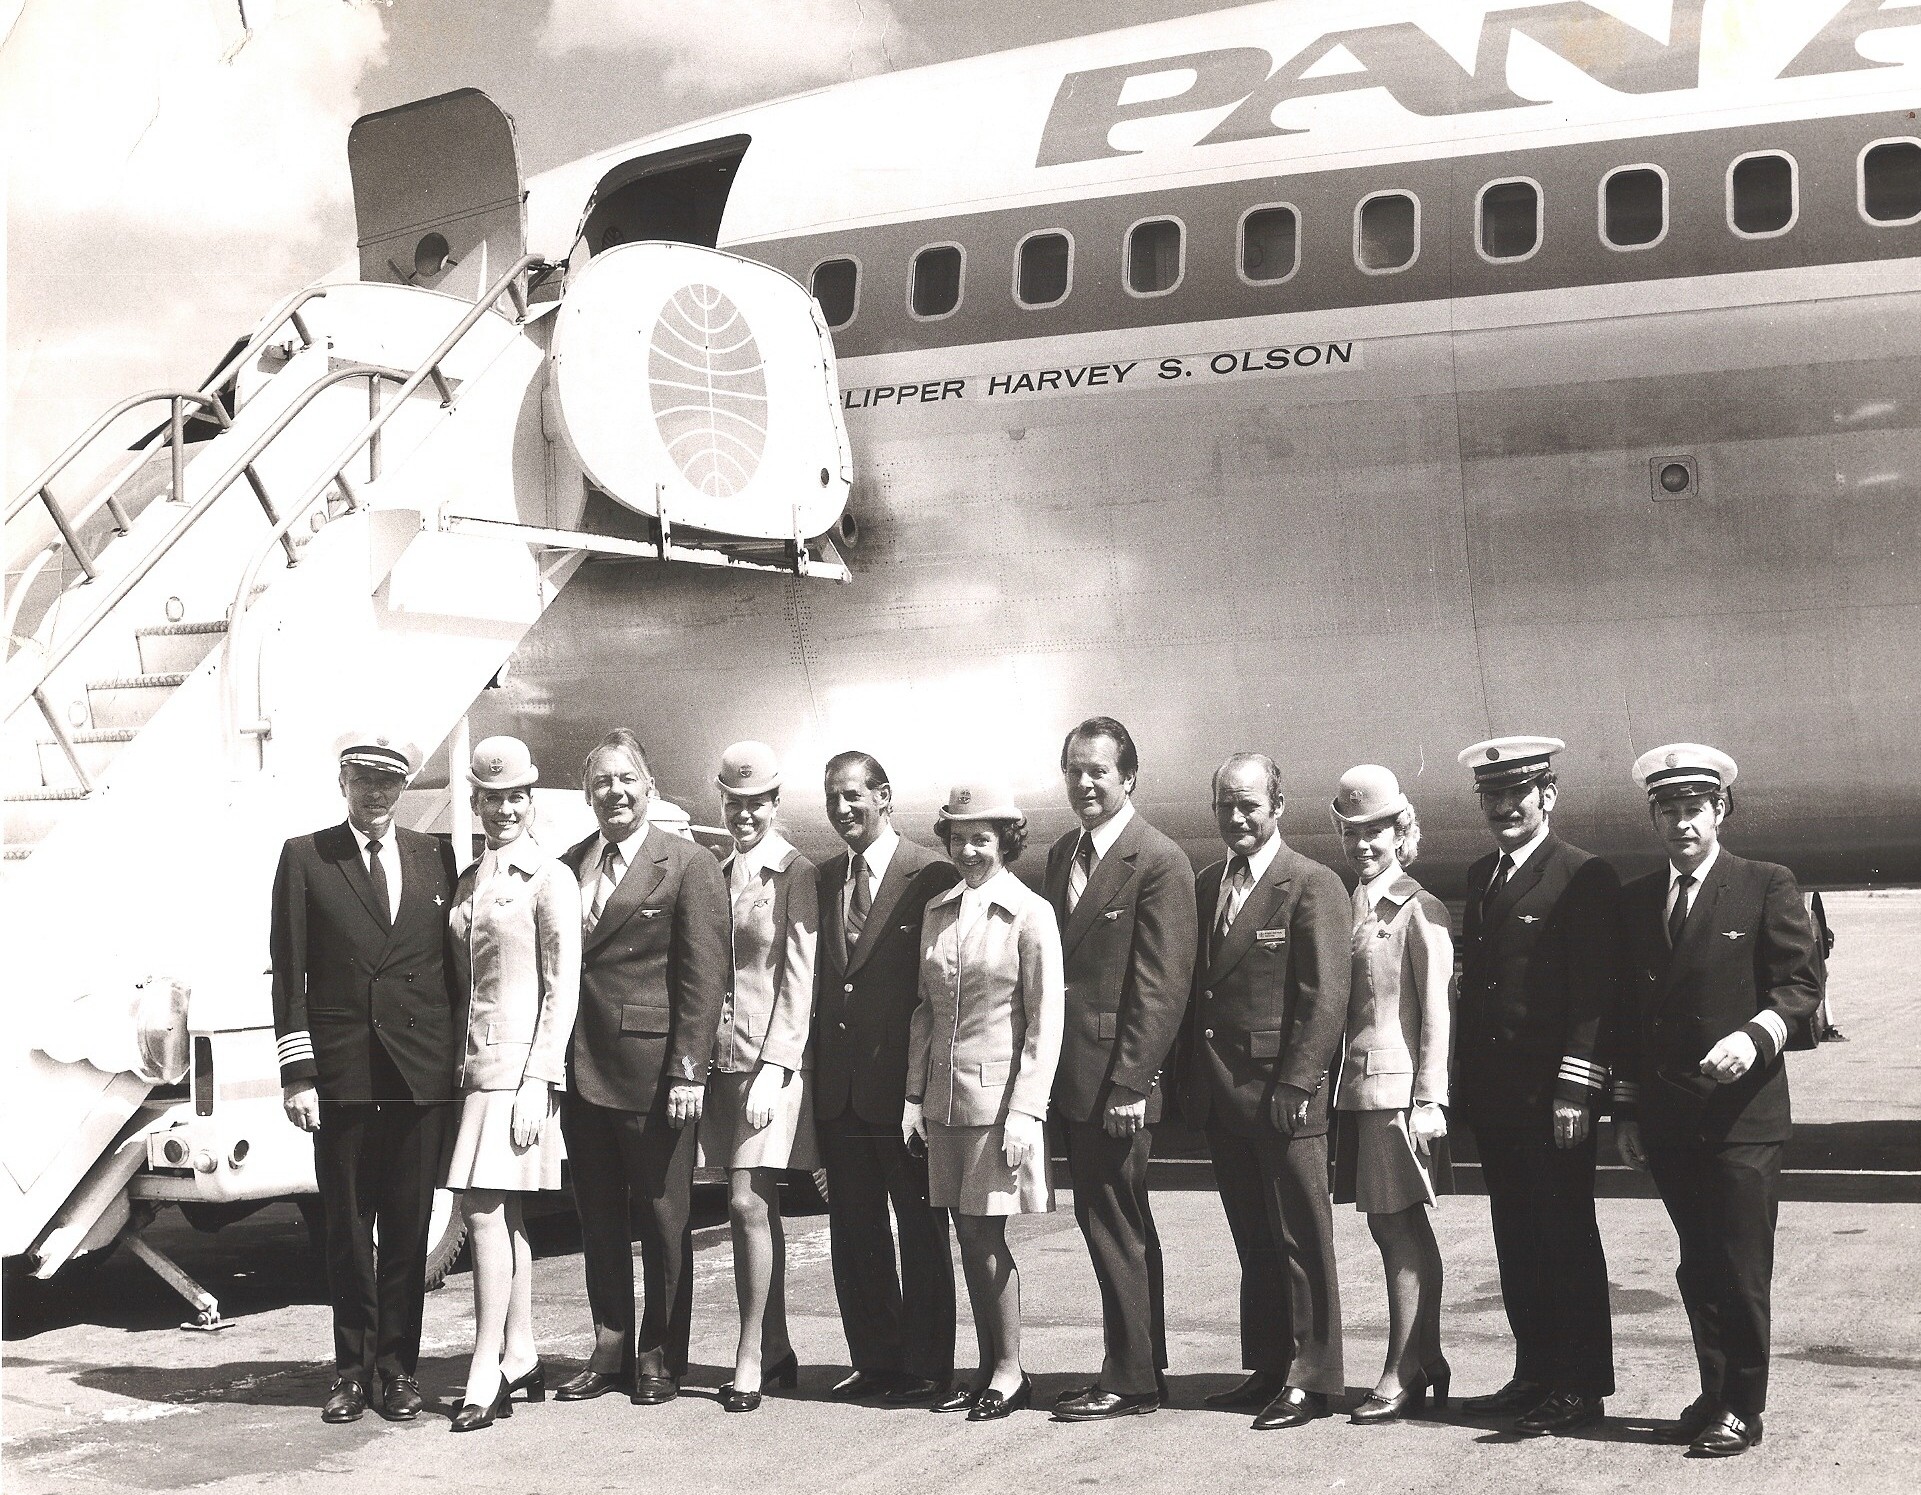 1970s Ray & Andree Le Dour pose with fellow crew members by a Pan Am Boeing 707 while serving on an Olson Charter.  The Olsen Charters were an exclusive round-the-world all first class service.